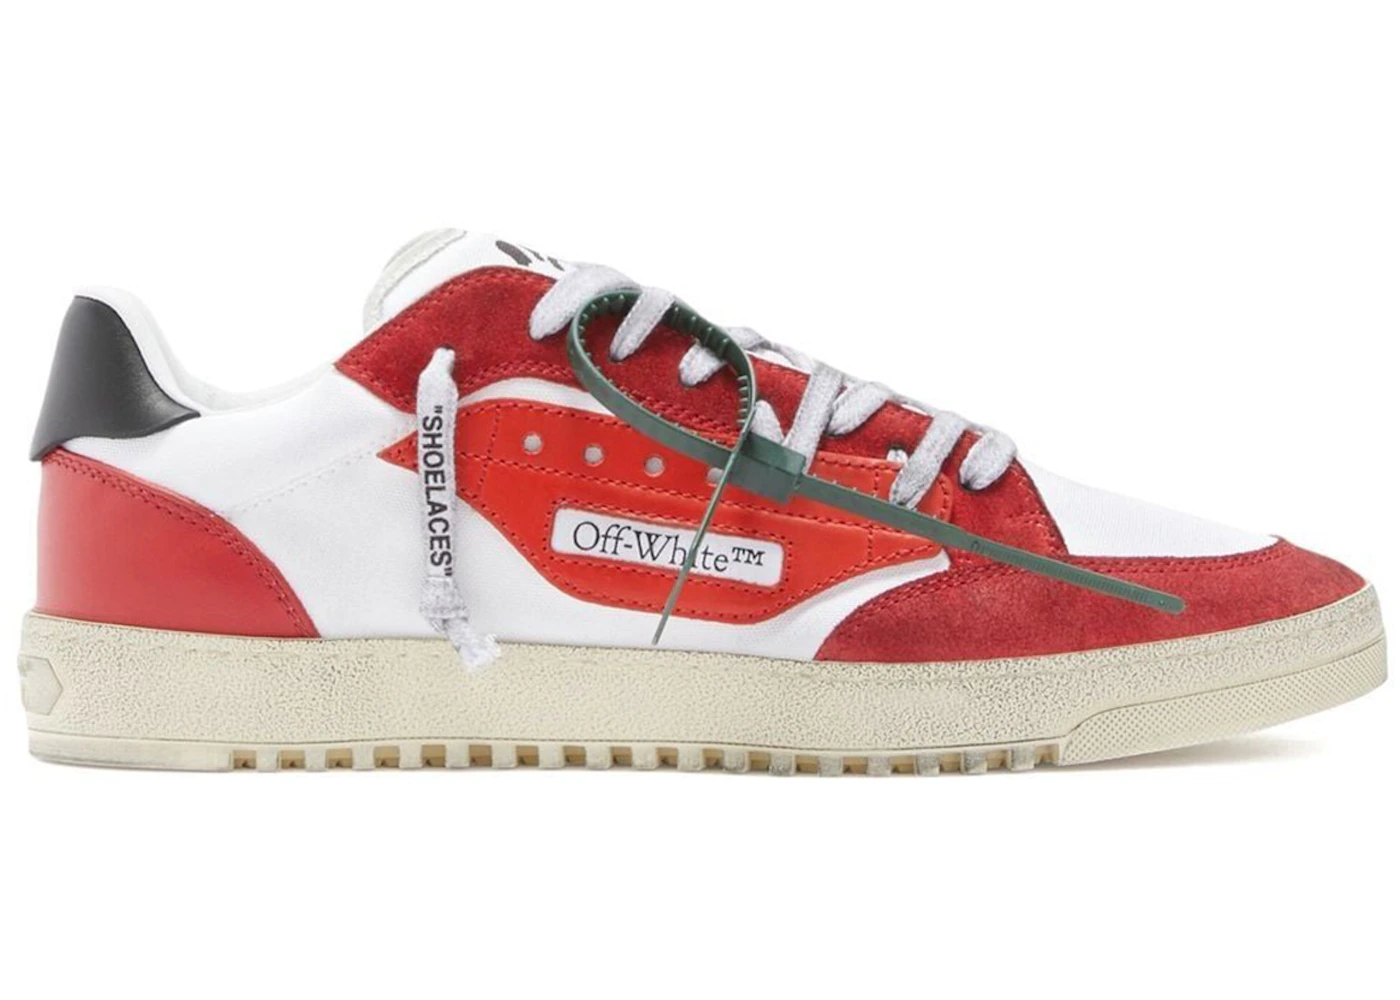 OFF-WHITE Vulcanized 5.0 Low Top Distressed White Red Black Men's ...